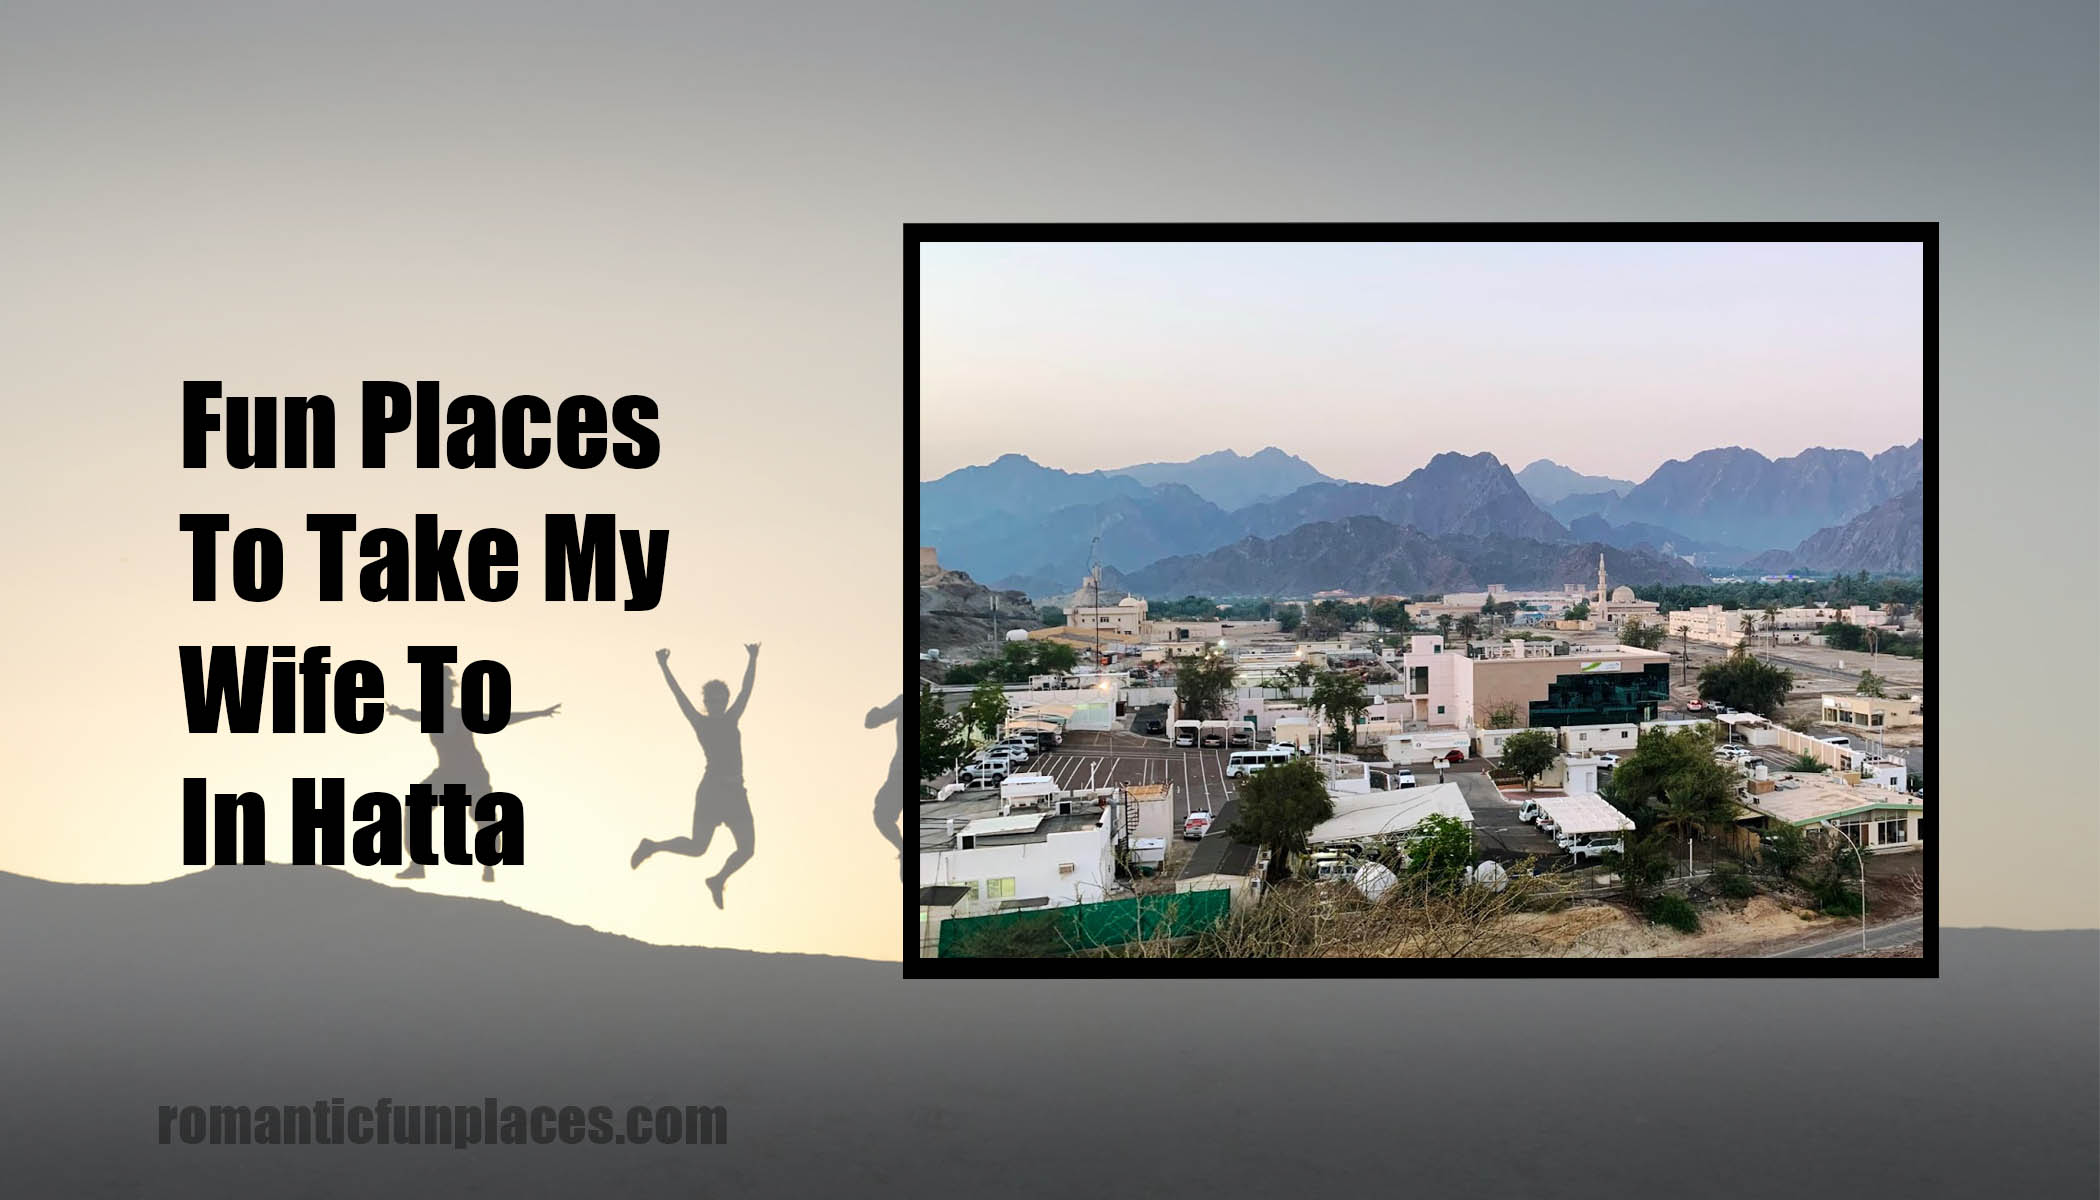 Fun Places To Take My Wife To In Hatta